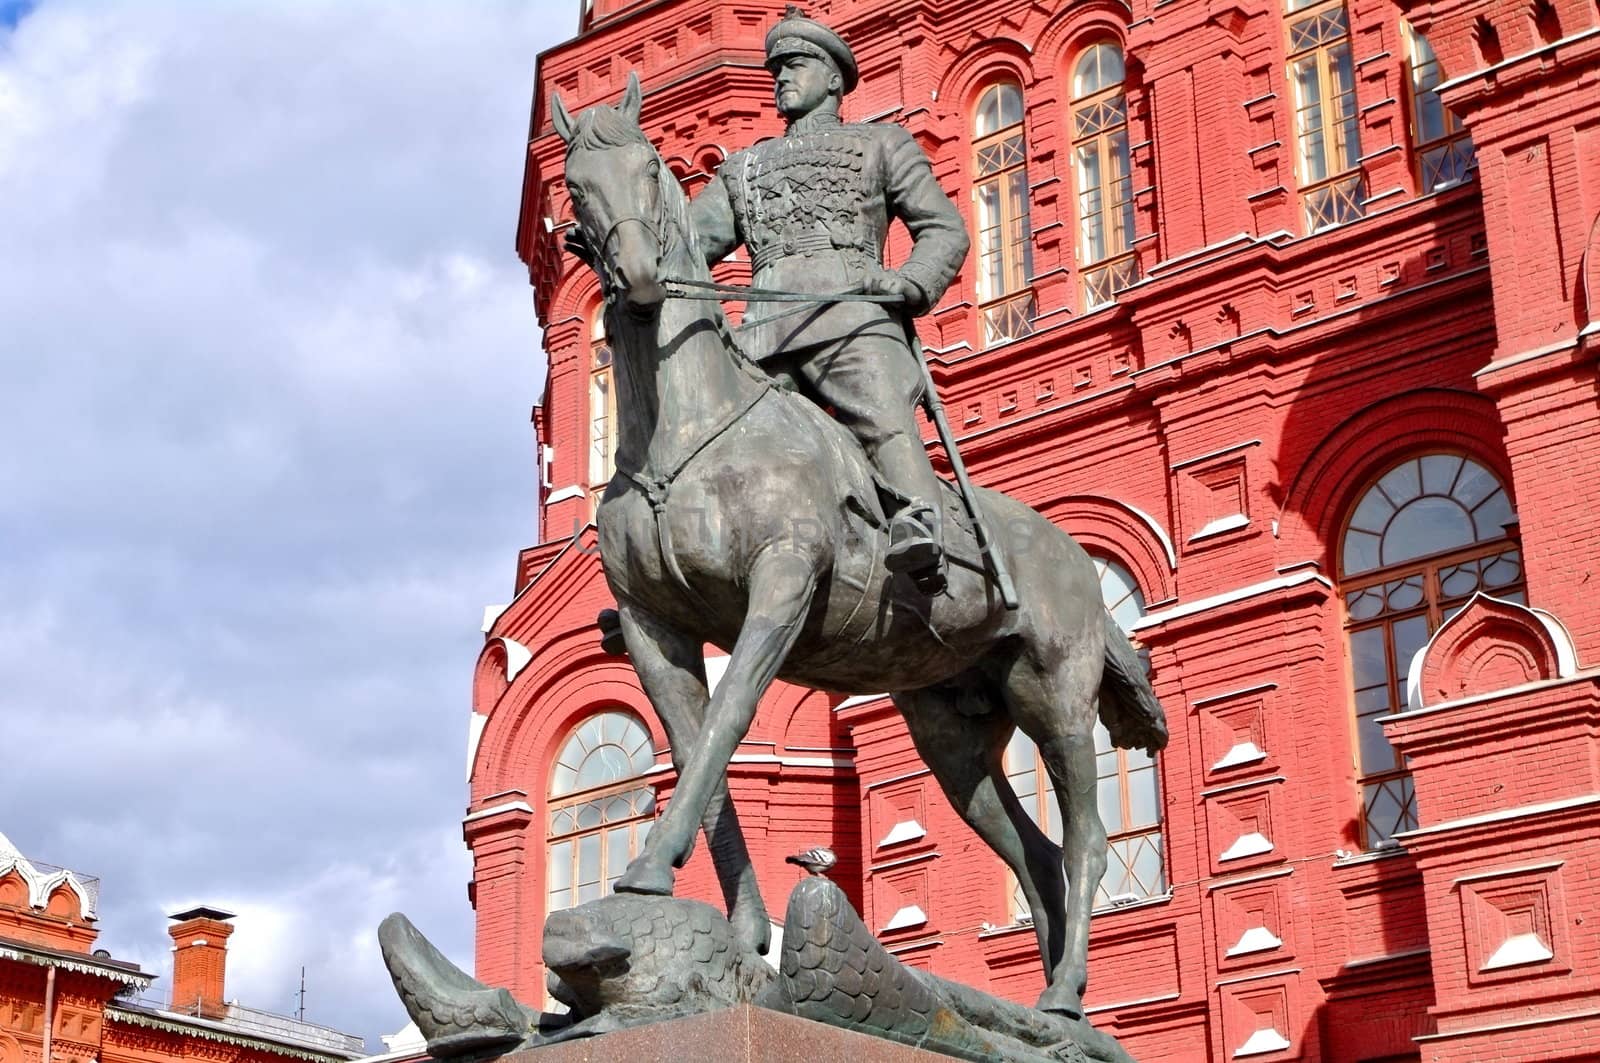 Zhukov monument near National historic museum in Moscow, Russia by Stoyanov